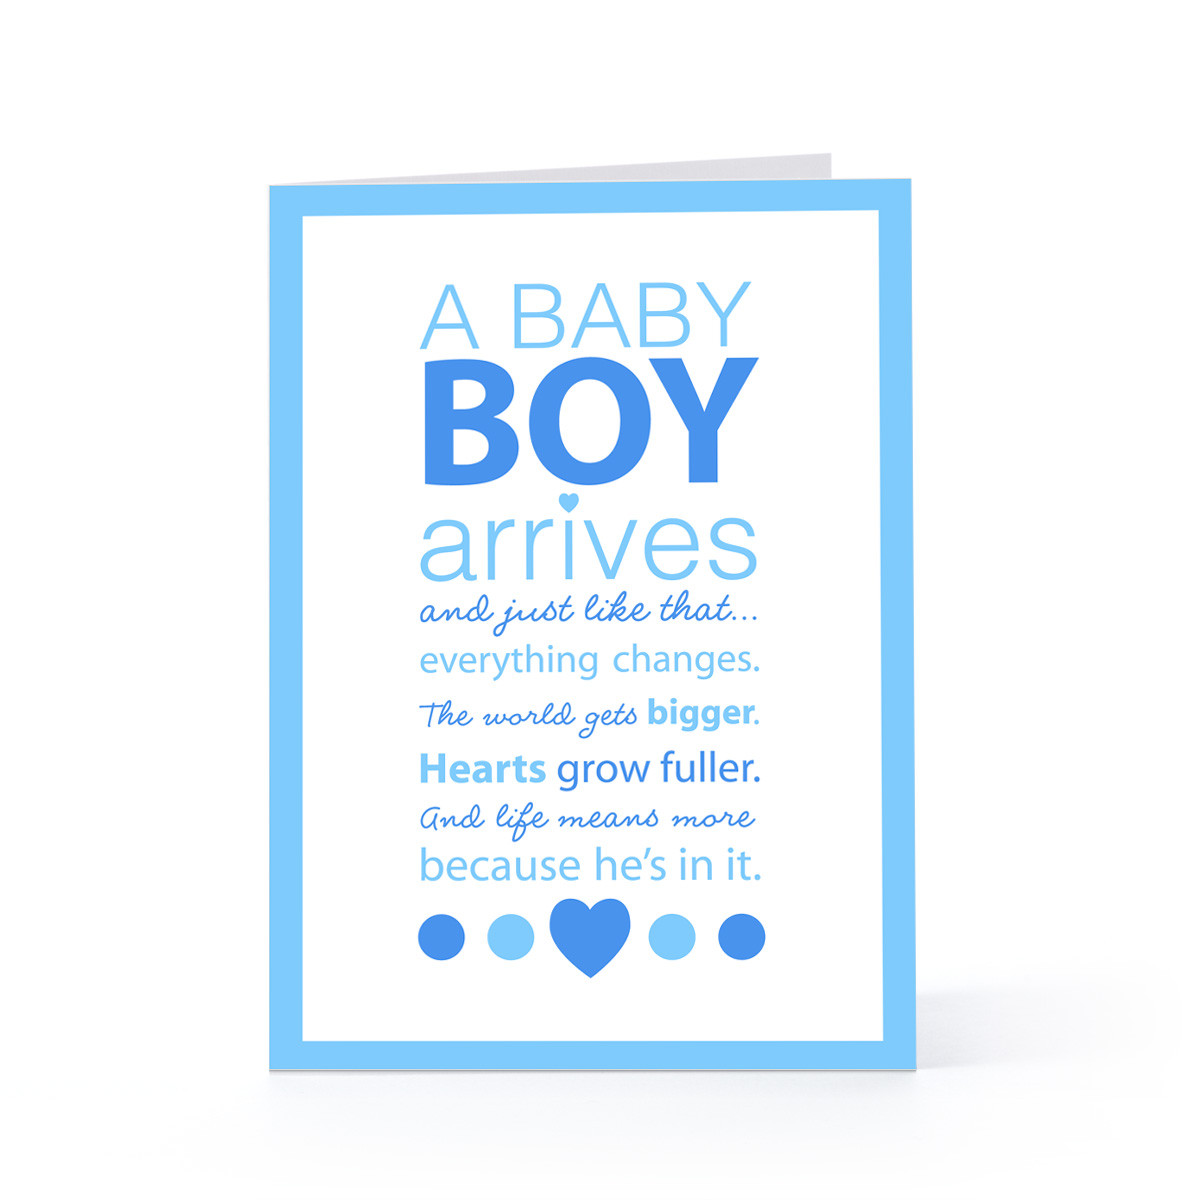 Quote About Having A Baby Boy
 Baby Boy Birth Quotes QuotesGram